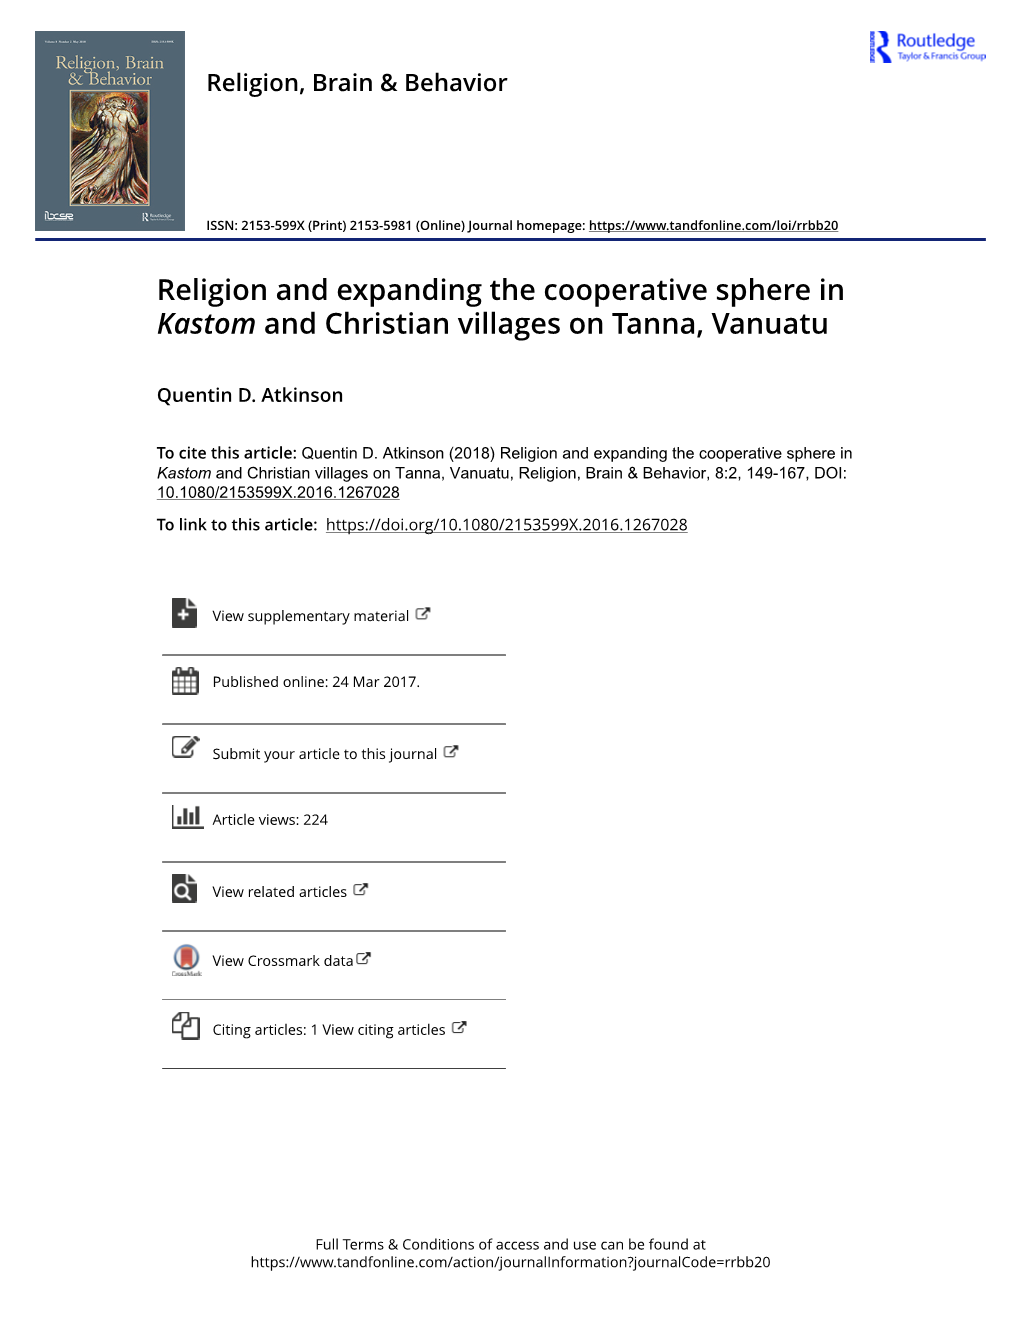 Religion and Expanding the Cooperative Sphere in Kastom and Christian Villages on Tanna, Vanuatu